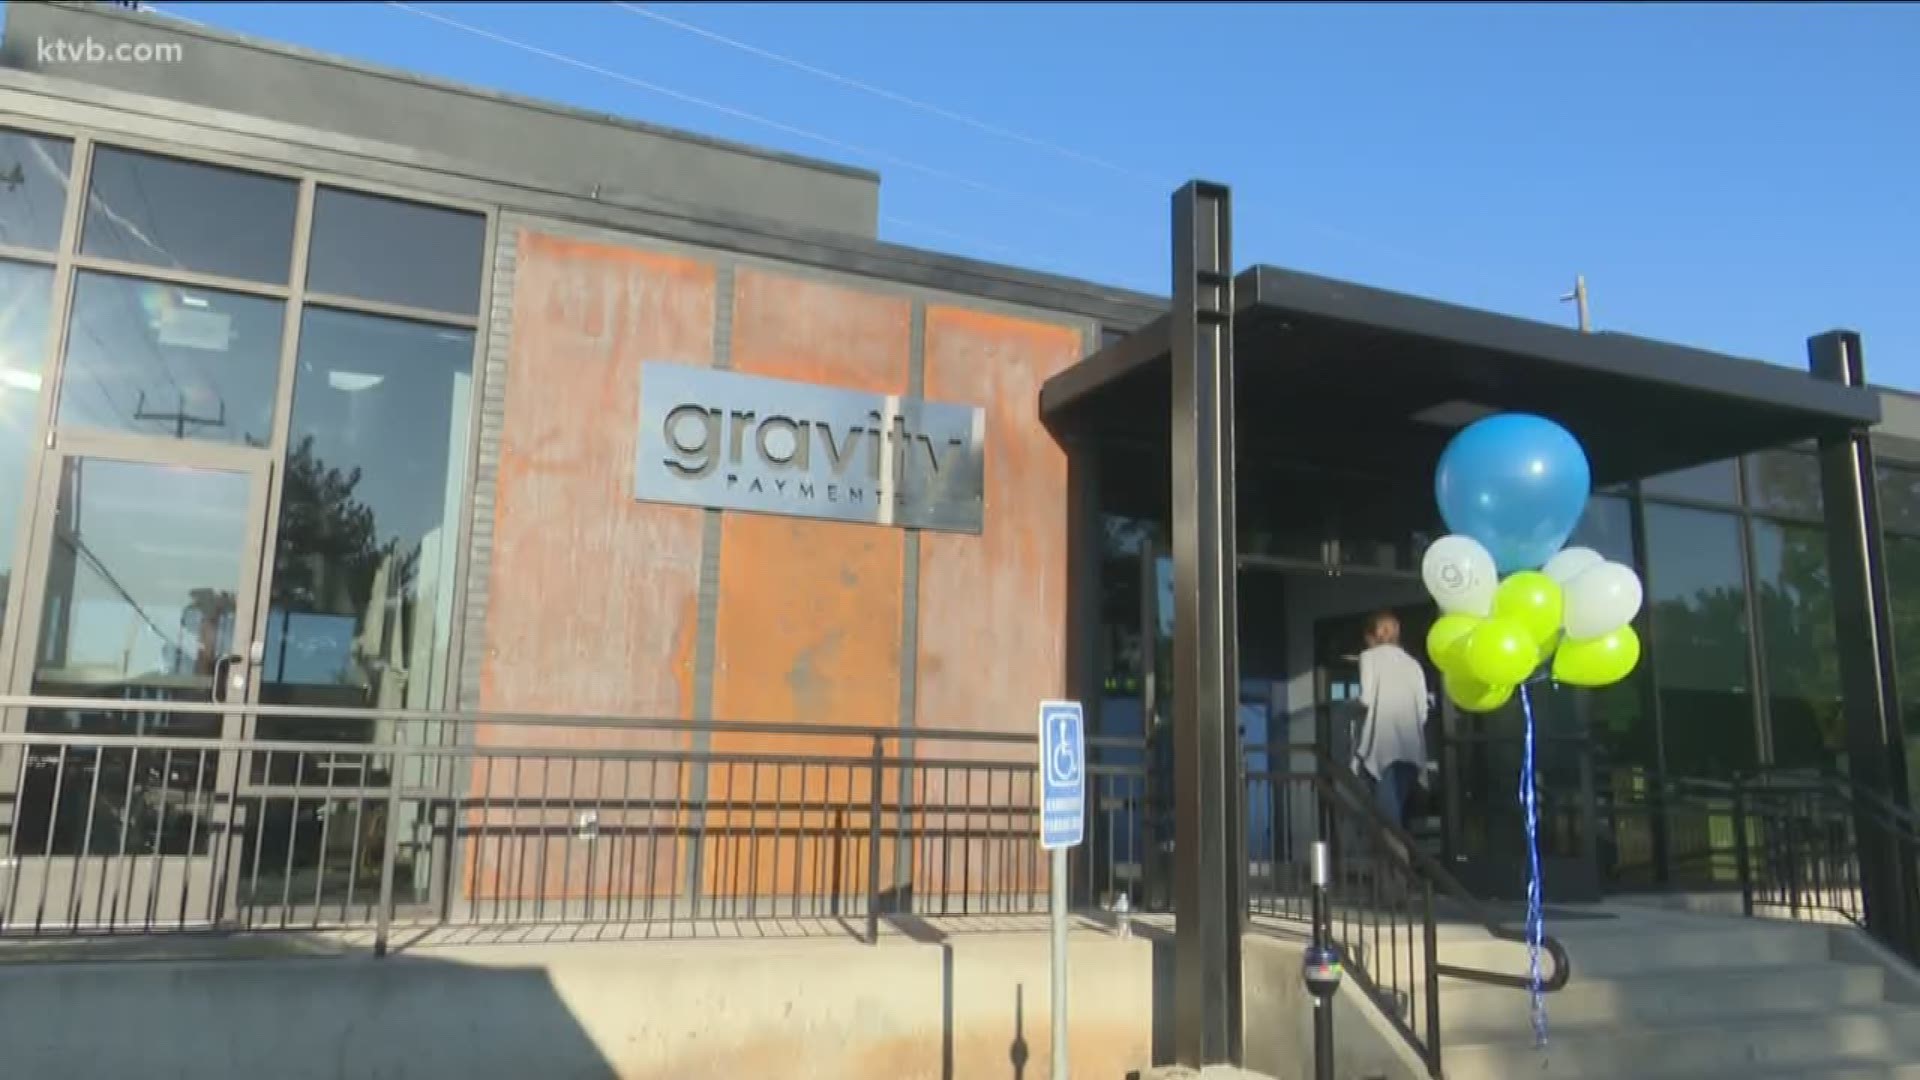 Employees at a credit card processing company in Boise started their workweek off with some great news - the company will raise its minimum wage to $70,000.